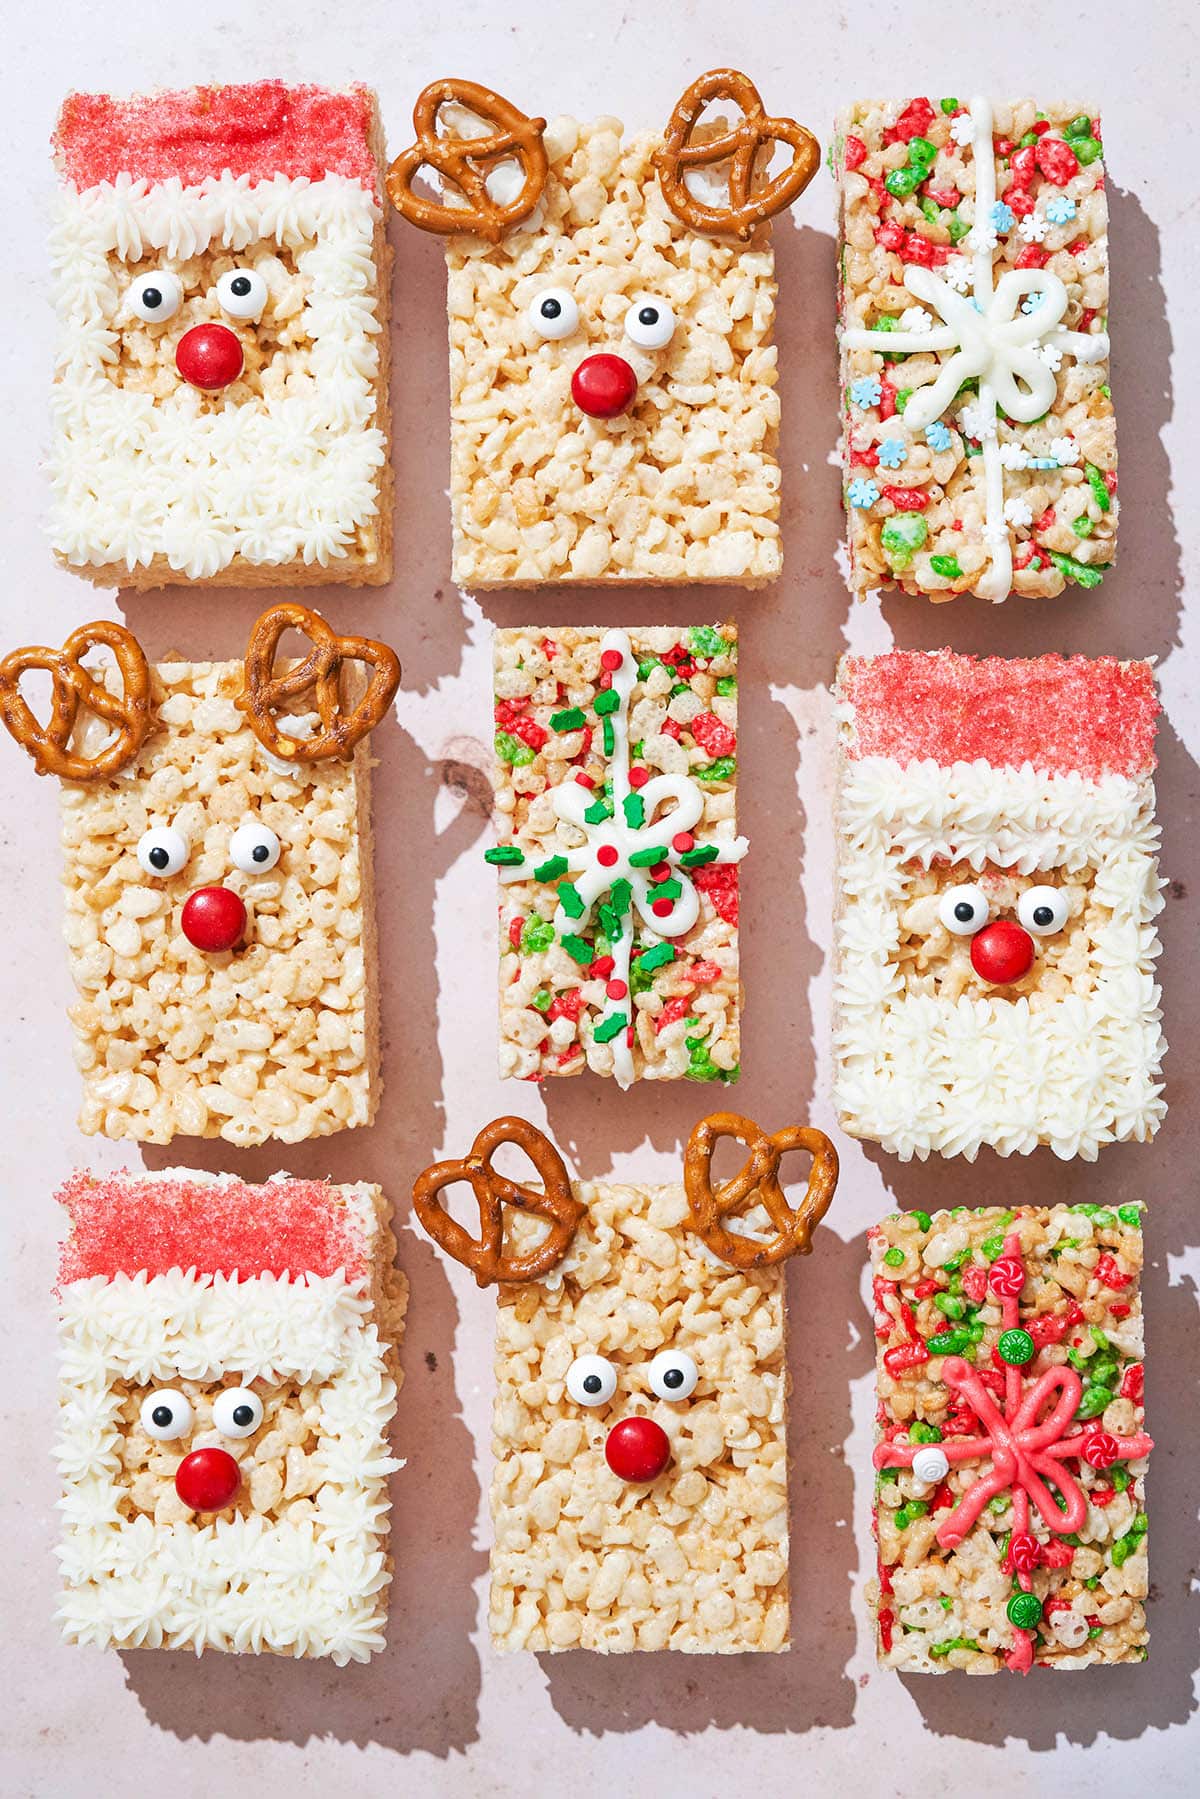 Nine holiday-decorated rice krispie treats, top down view.